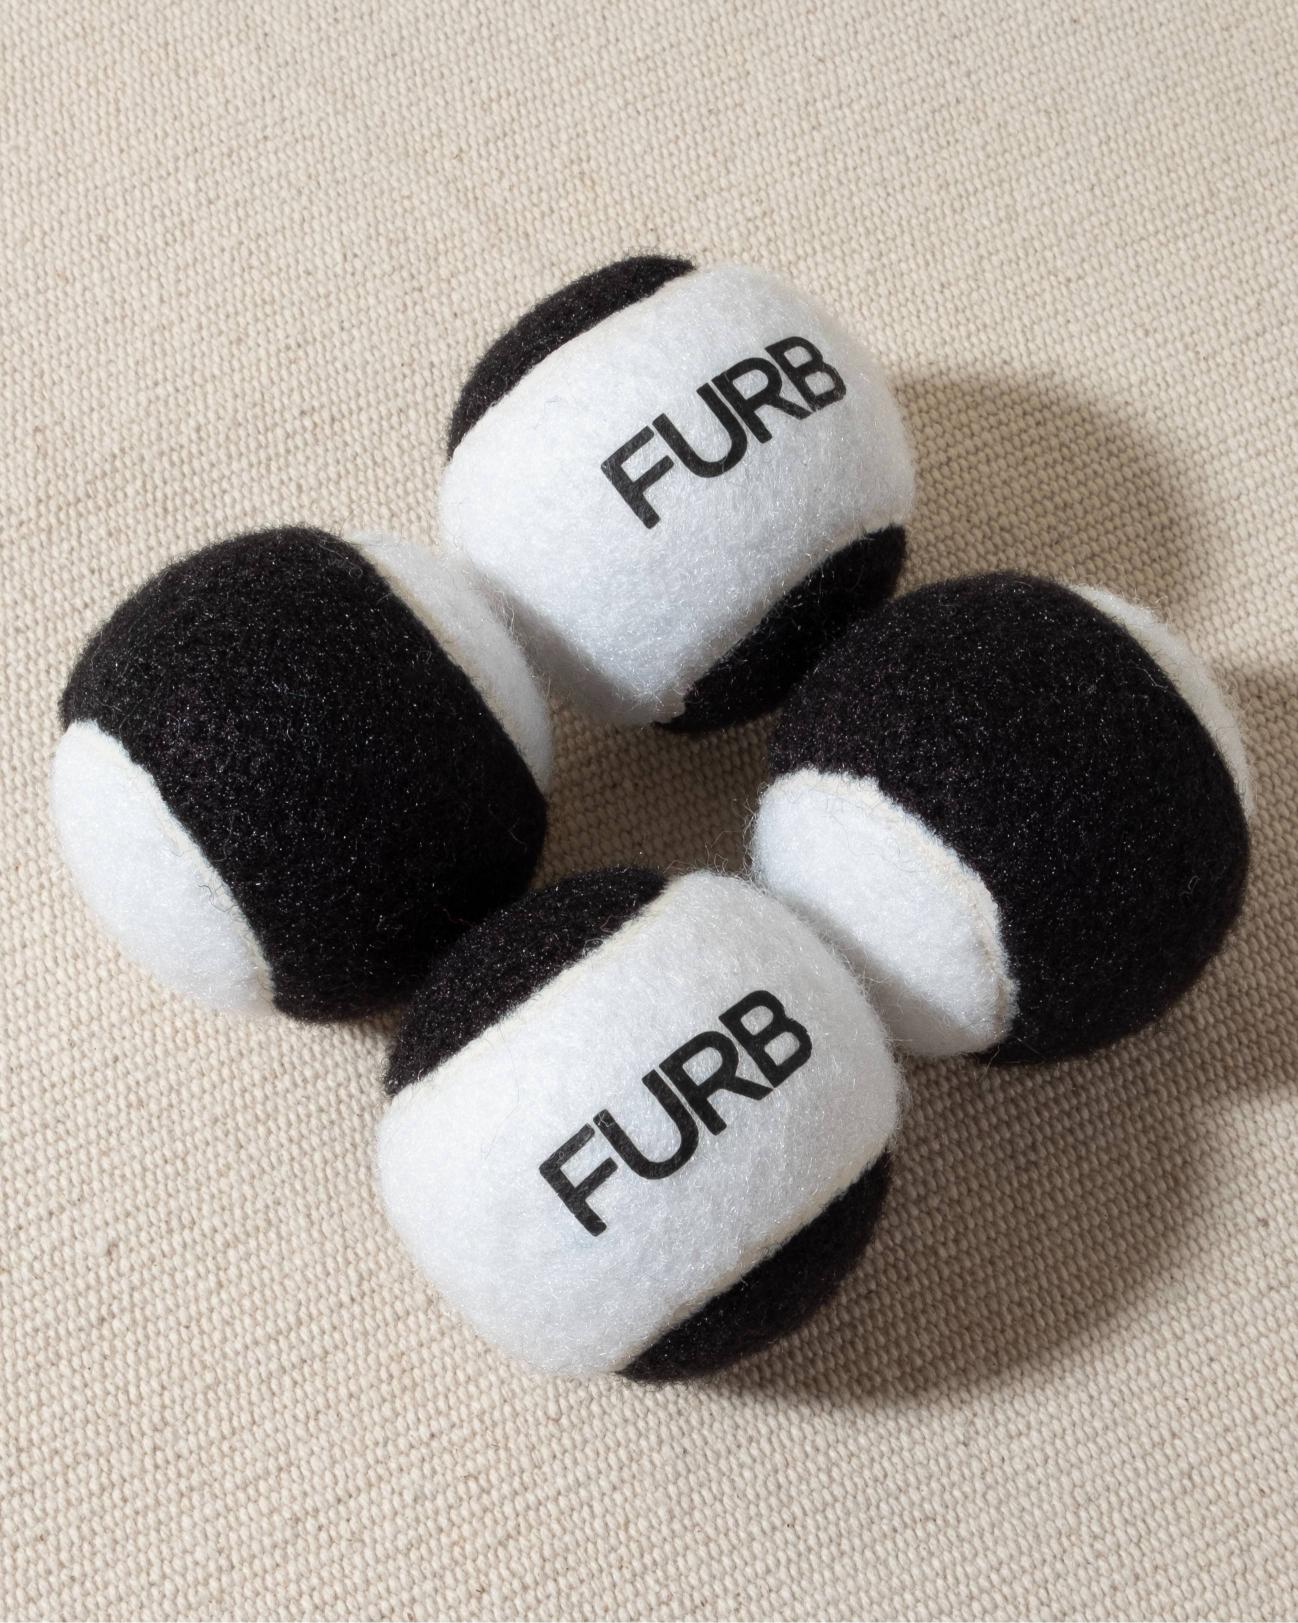 FURB branded black and white tennis ball with black furb logo for dogs